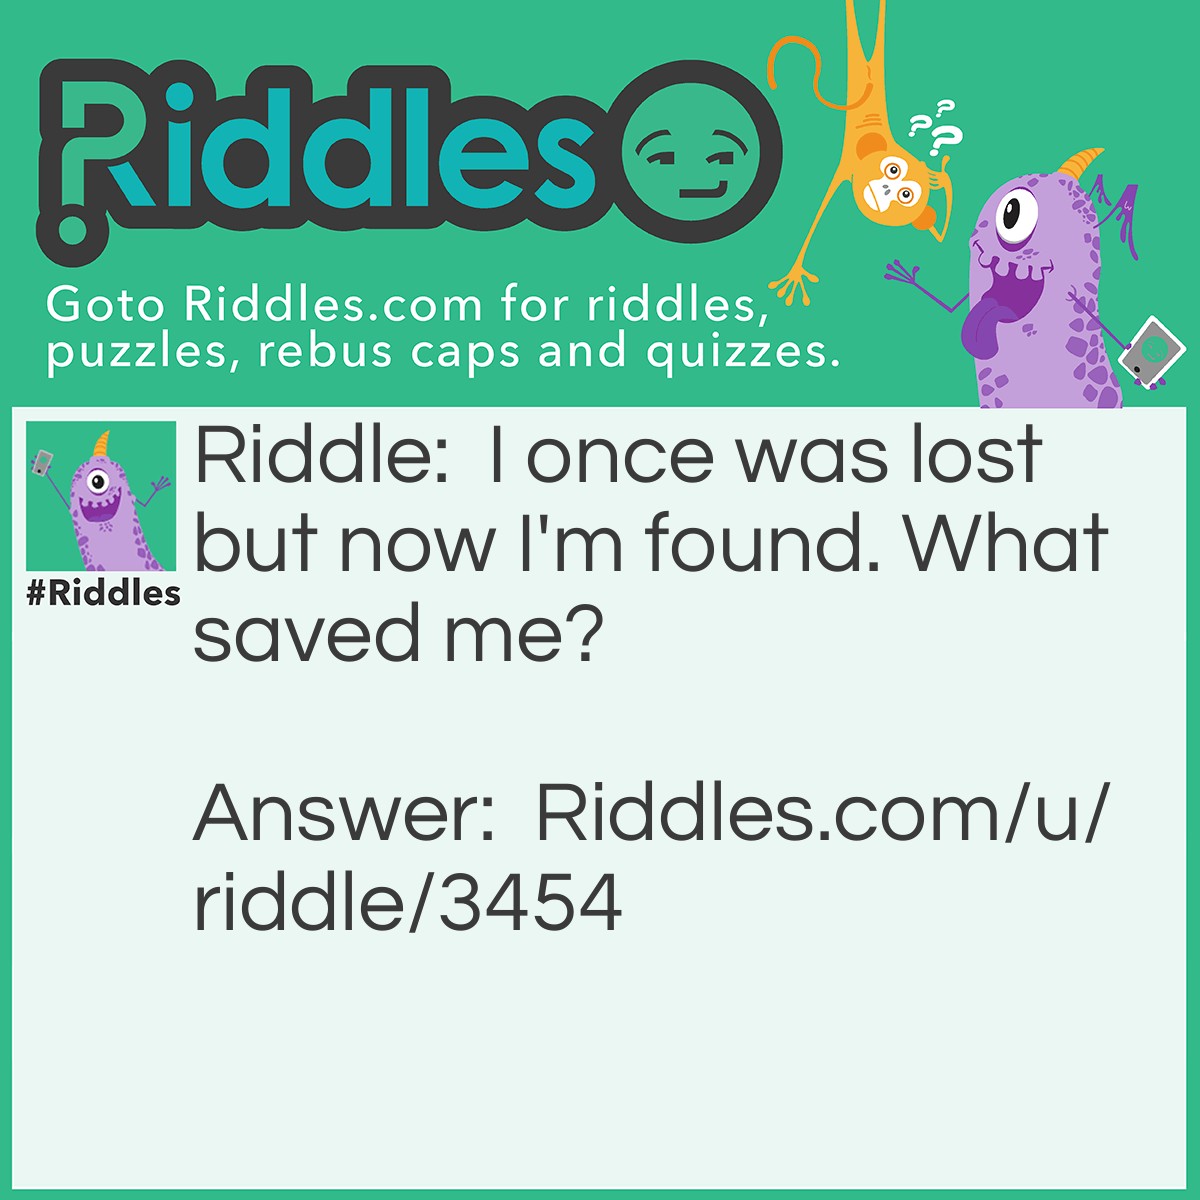 Riddle: I once was lost but now I'm found. What saved me? Answer: A GPS.